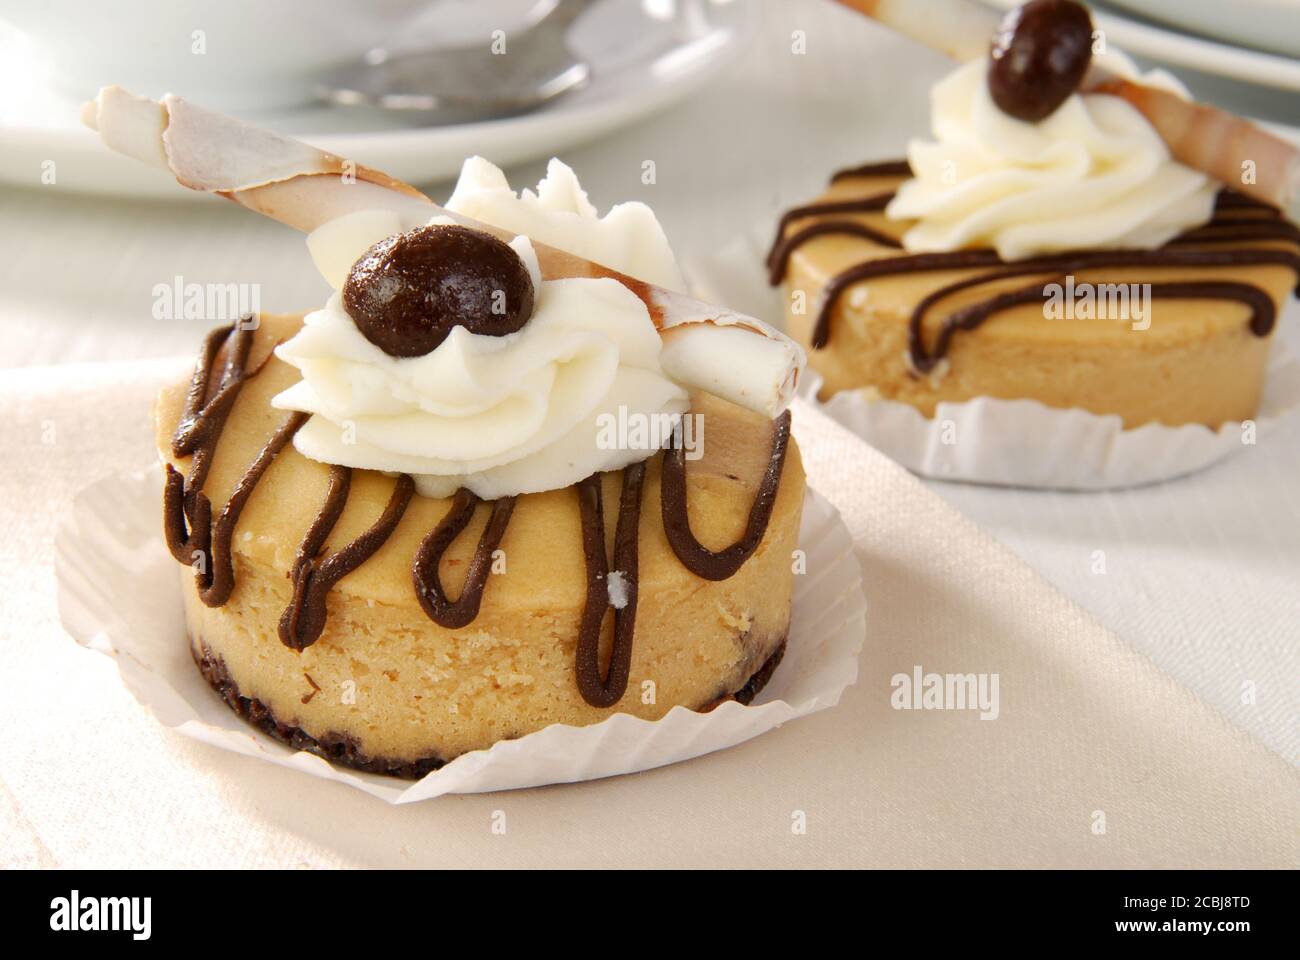 A gourmet mini dessert tart topped with whipped cream and a chocolate covered espresso bean Stock Photo